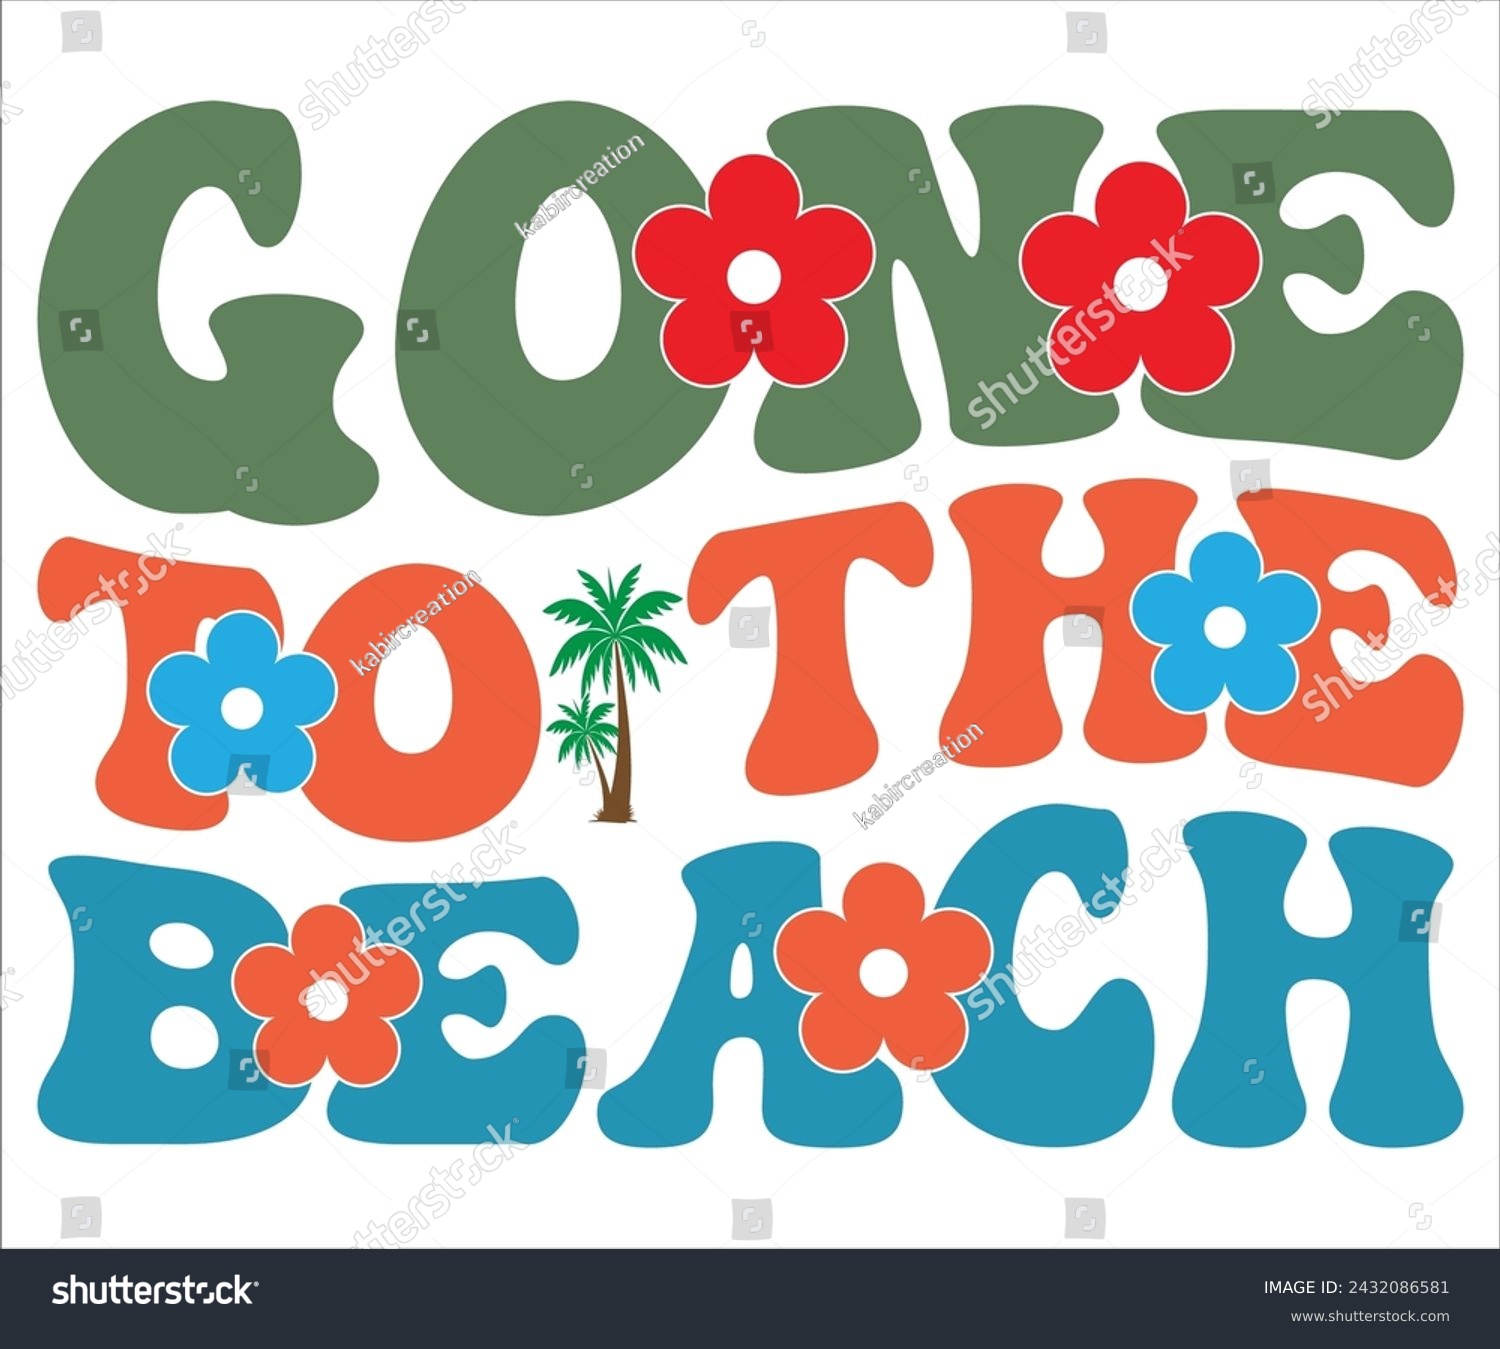 SVG of  Gone To The Beach T-shirt, Happy Summer Day T-shirt, Happy Summer Day Retro svg,Hello Summer Retro Svg,summer Beach Vibes Shirt, Vacation, Cut File for Cricut svg